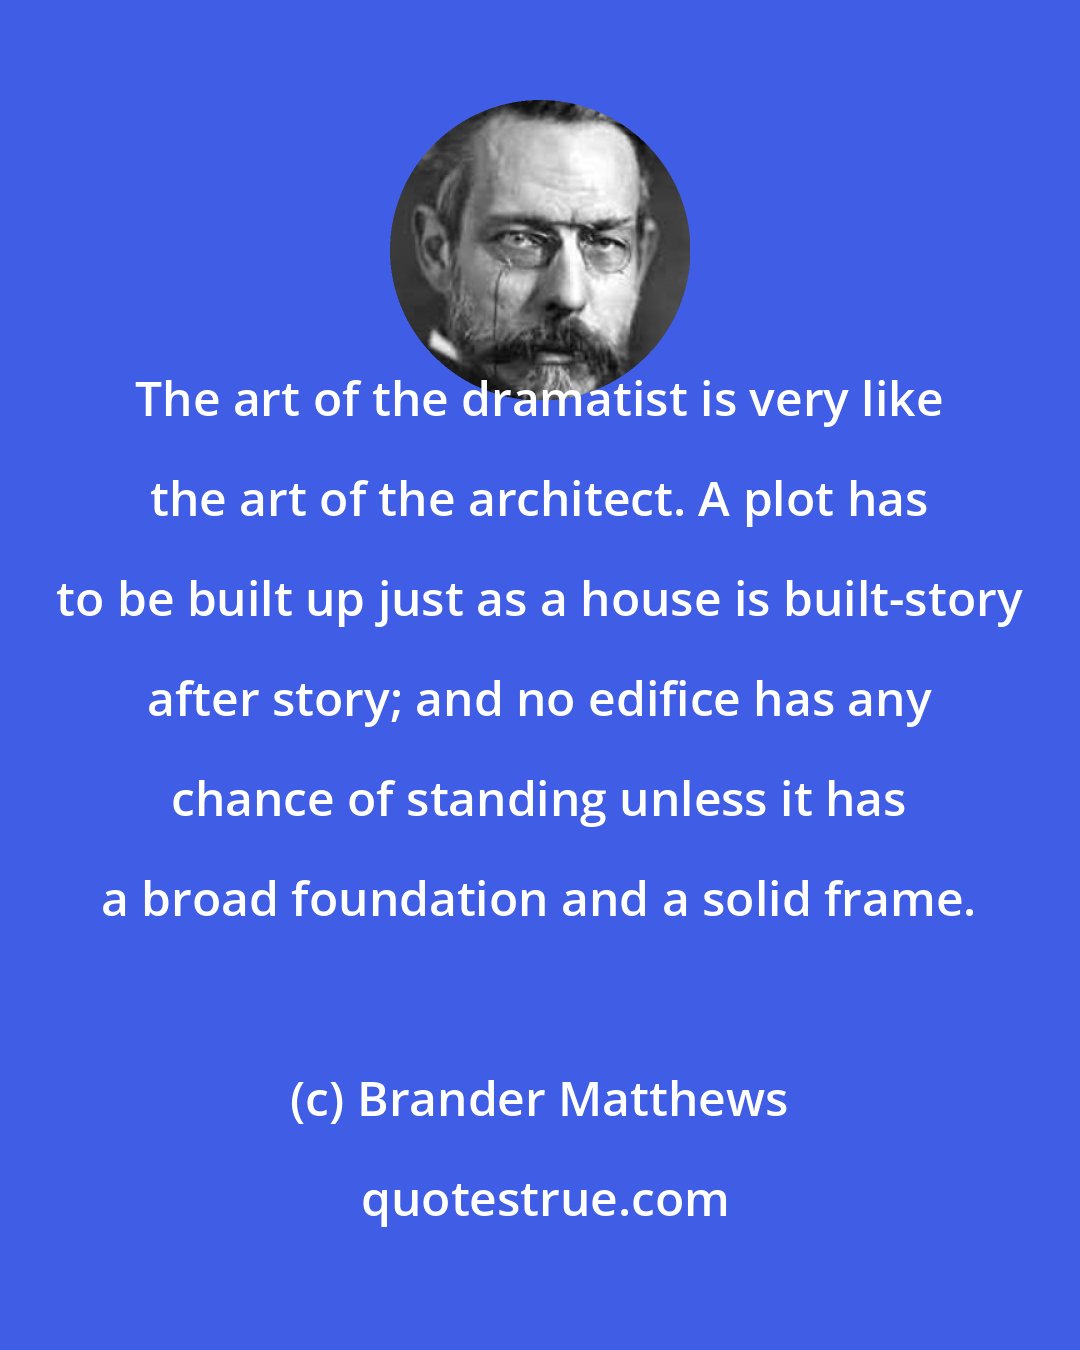 Brander Matthews: The art of the dramatist is very like the art of the architect. A plot has to be built up just as a house is built-story after story; and no edifice has any chance of standing unless it has a broad foundation and a solid frame.